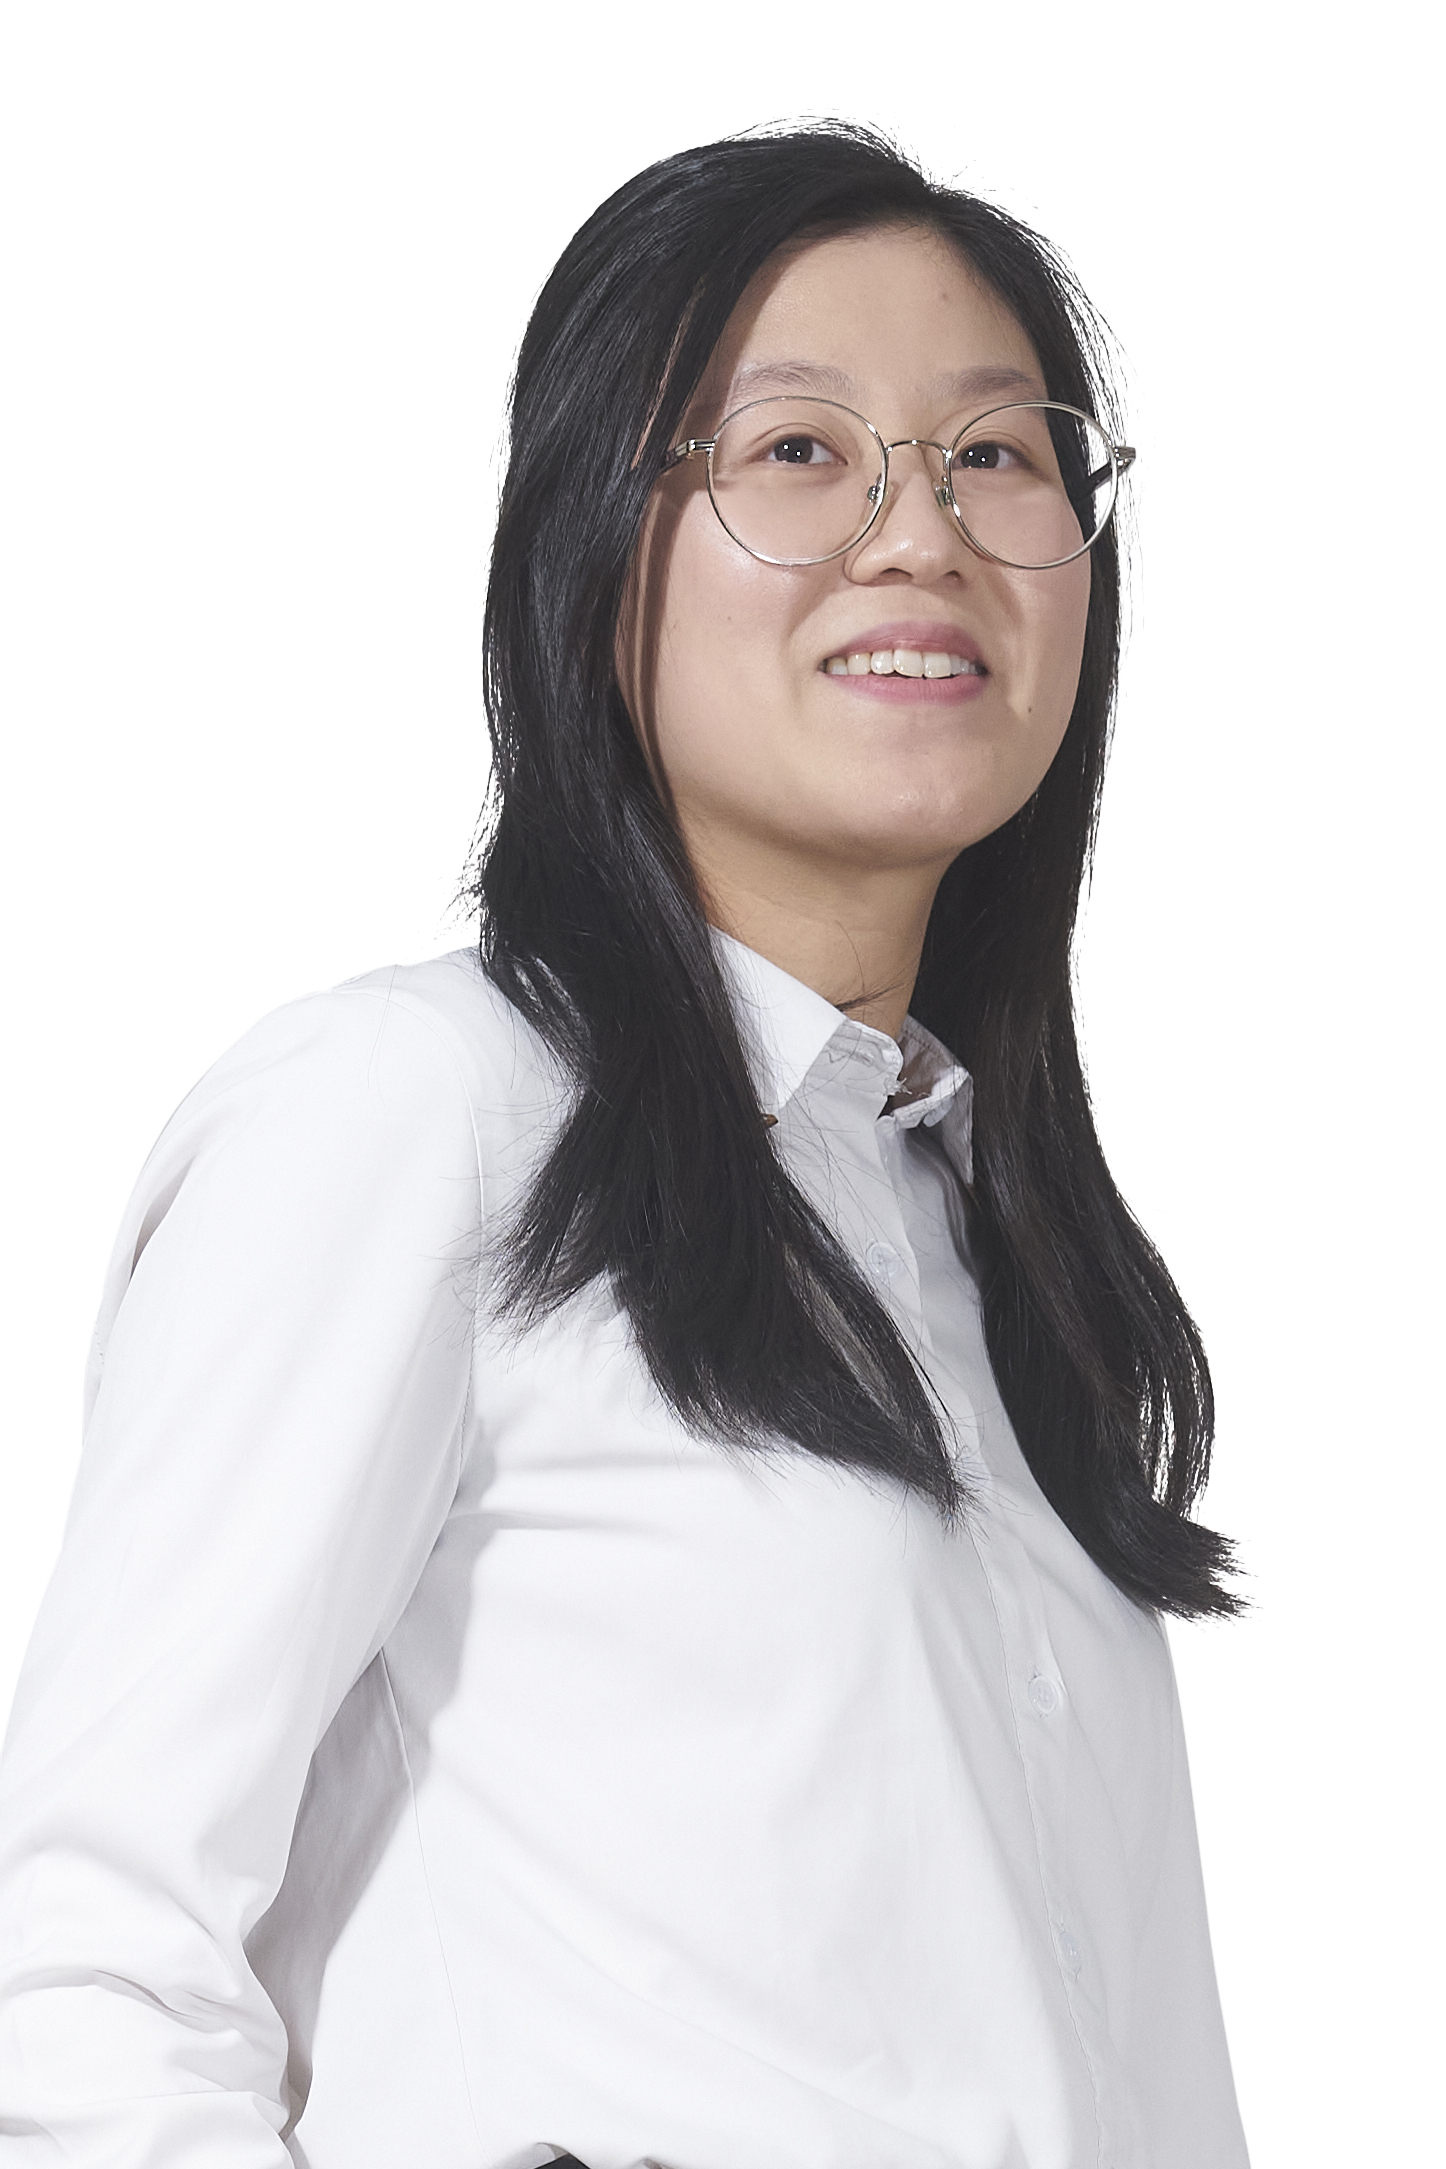 A head shot of Tanya Mok, the Technical Specialist for Mine Land Rehabilitation Authority. Tanya is wearing a white shirt and is smiling.